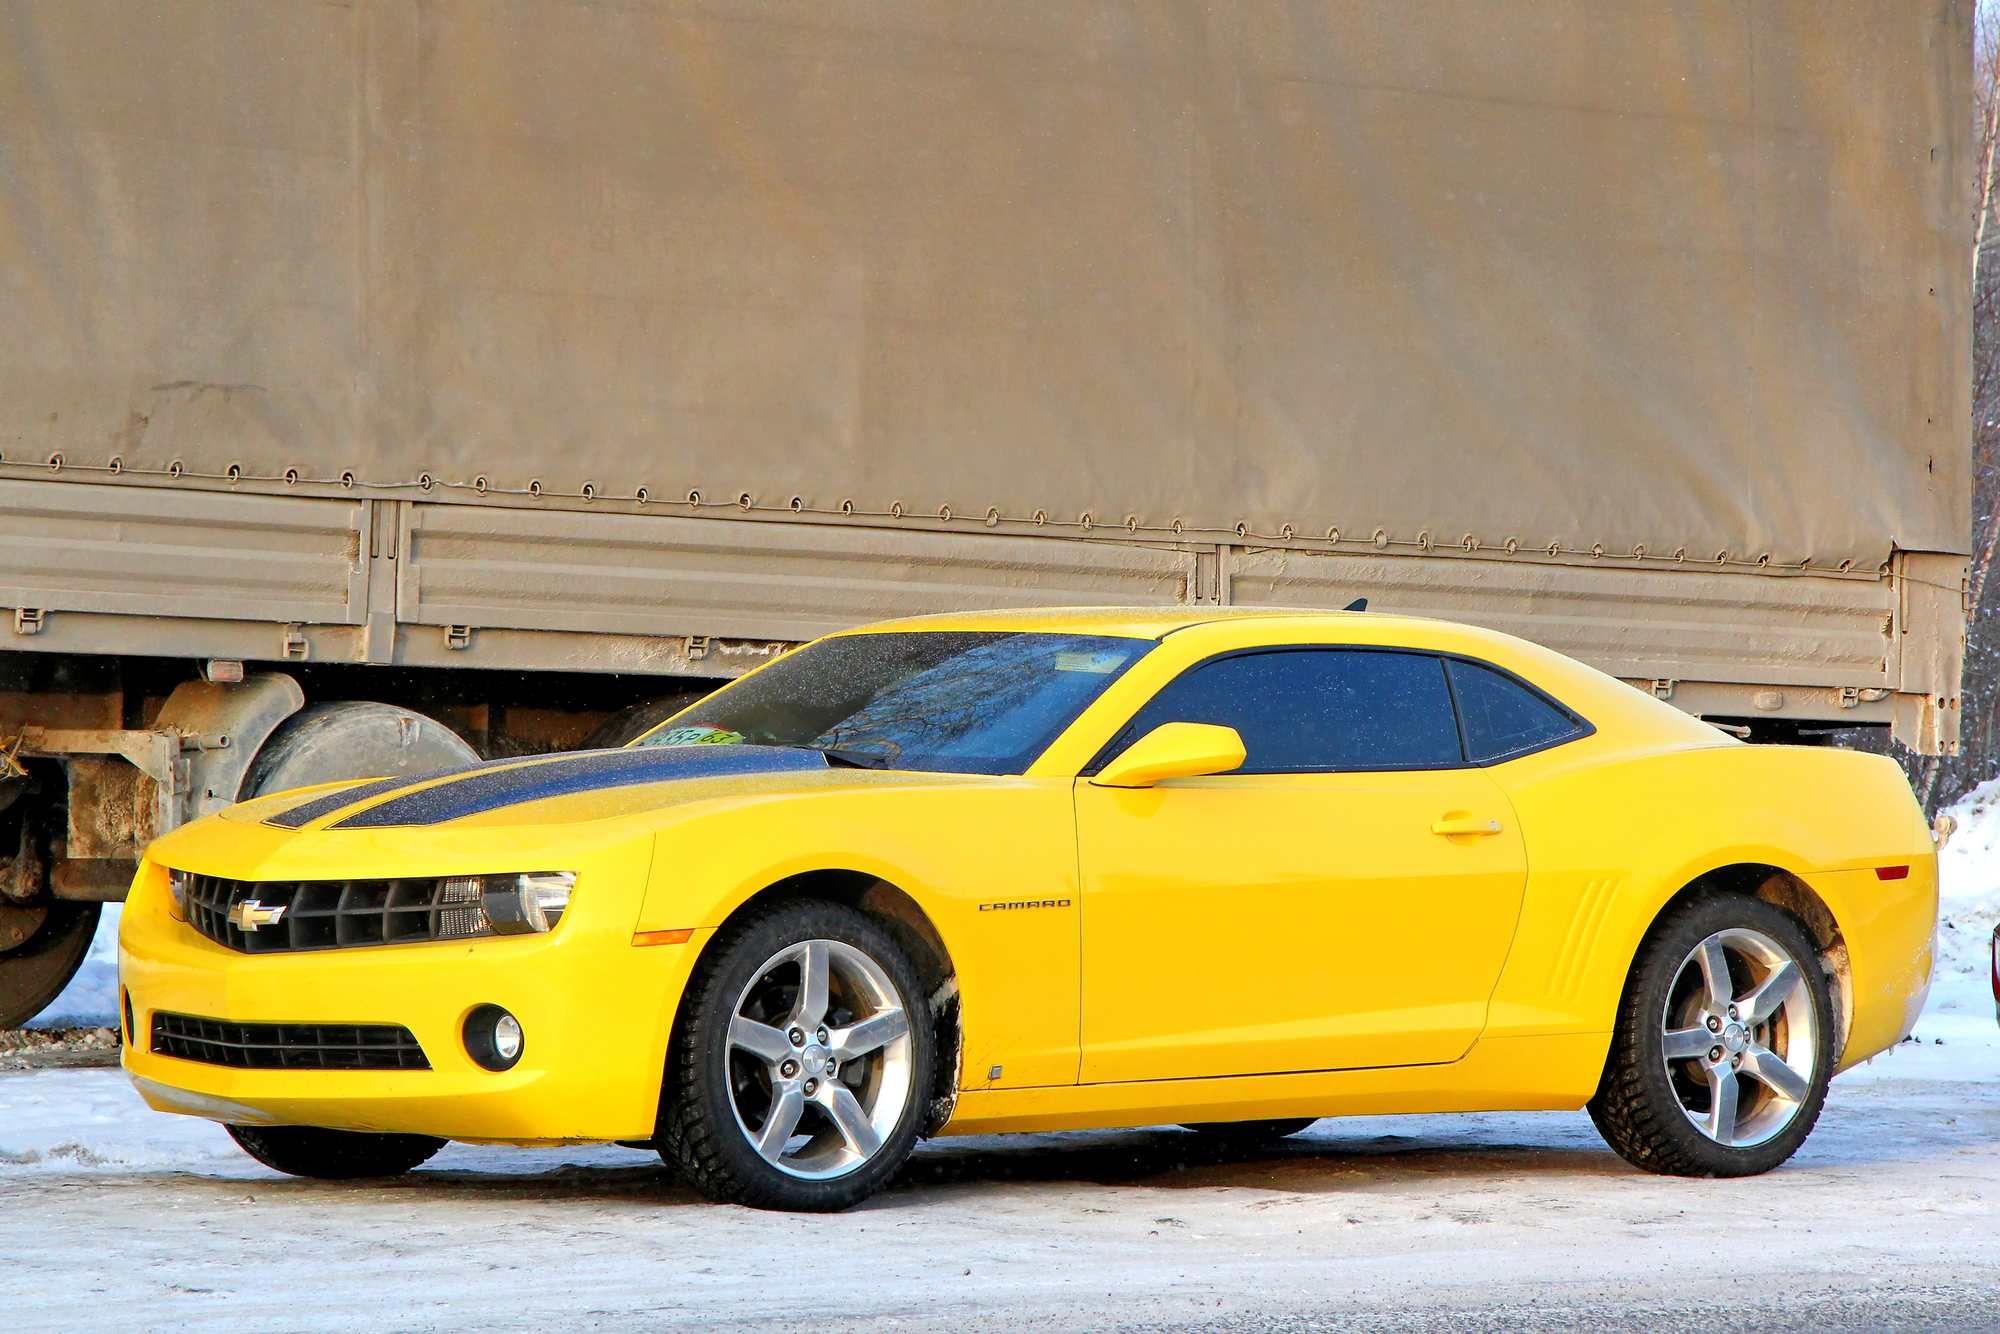 Chevolet Camaros are at the center of a class action lawsuit over faulty airbags.